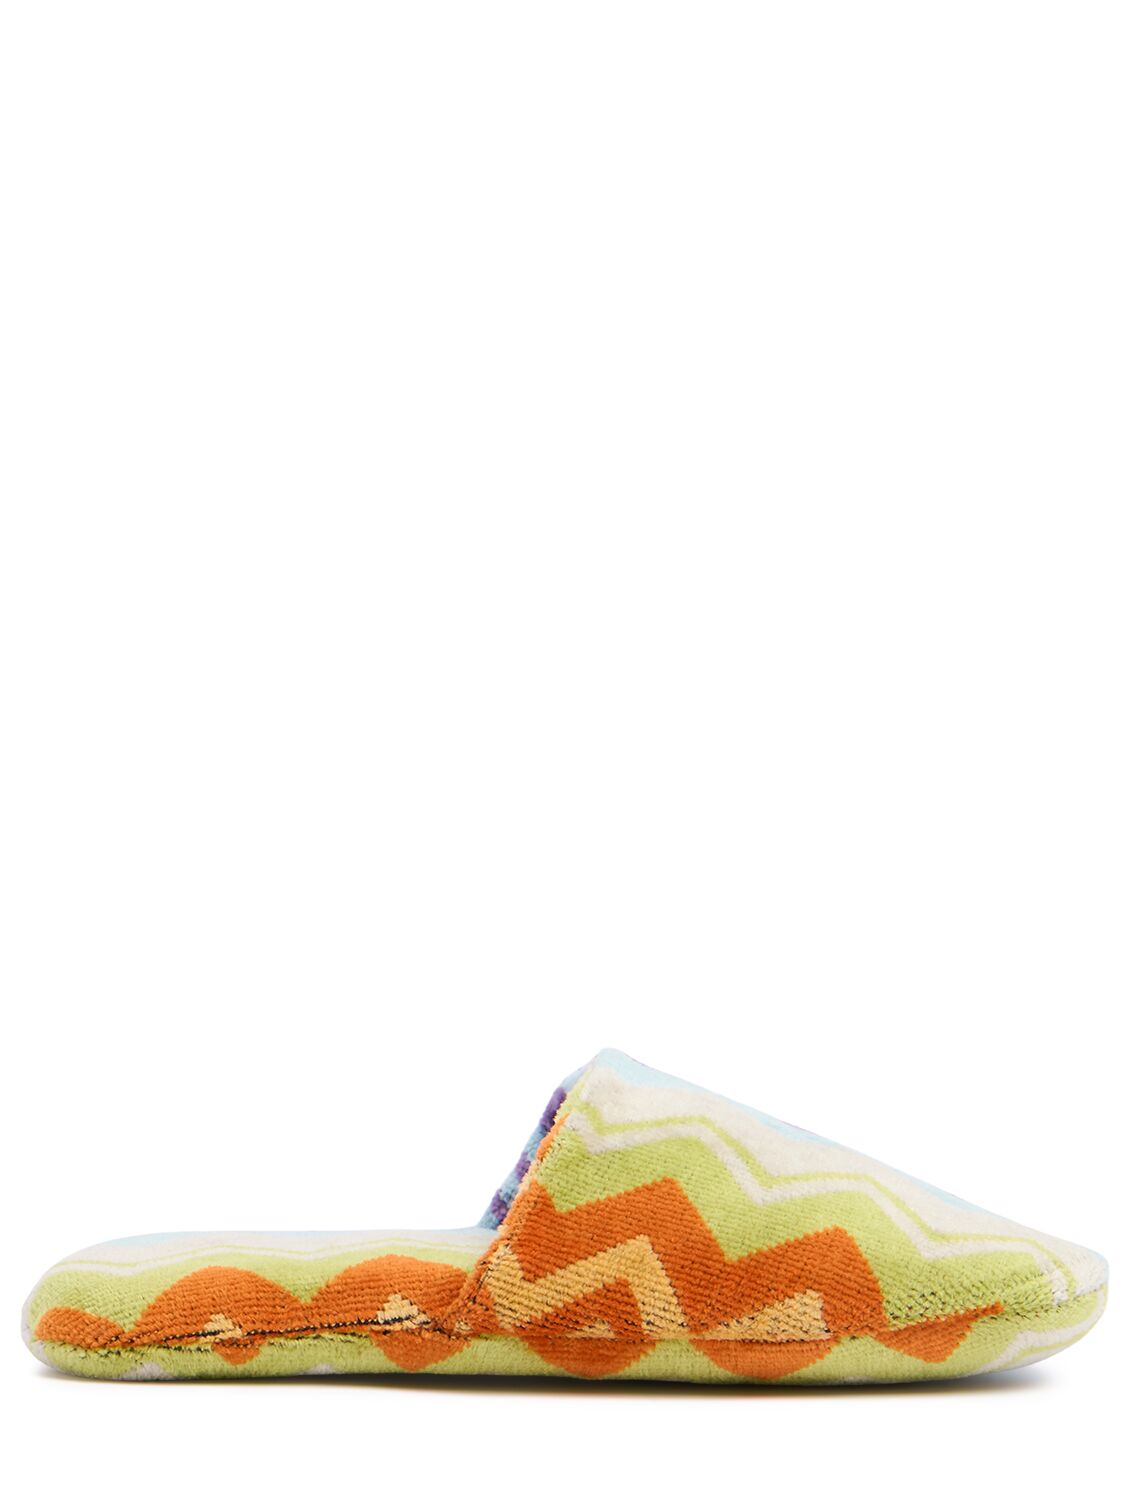 Missoni Giacomo Soft Terry Slippers In Yellow